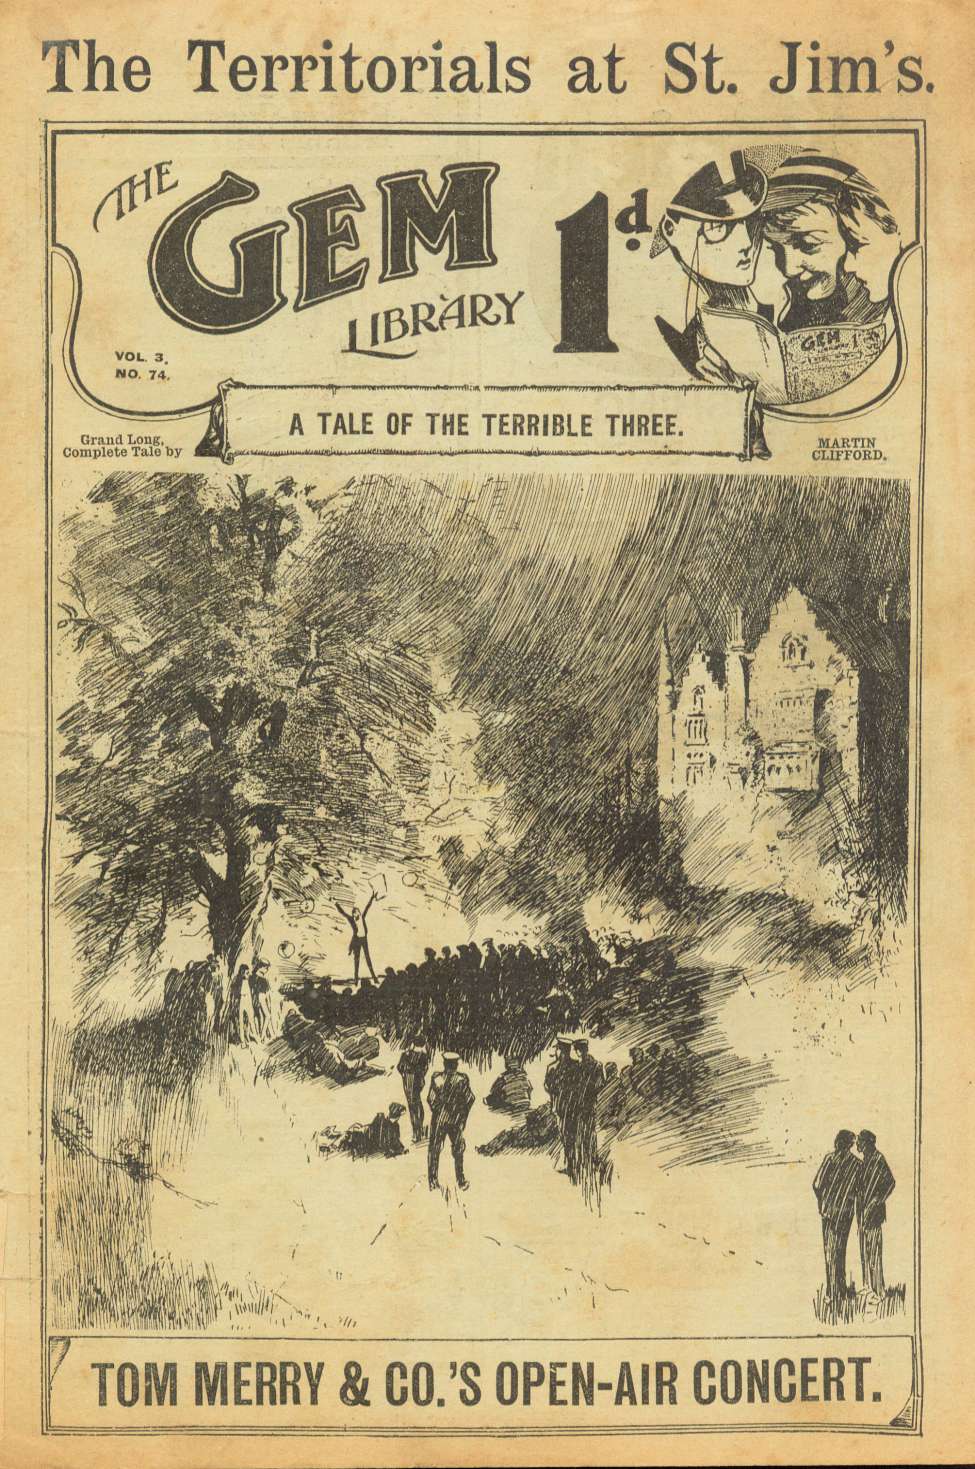 Comic Book Cover For The Gem v2 74 - The Territorials of St. Jim’s